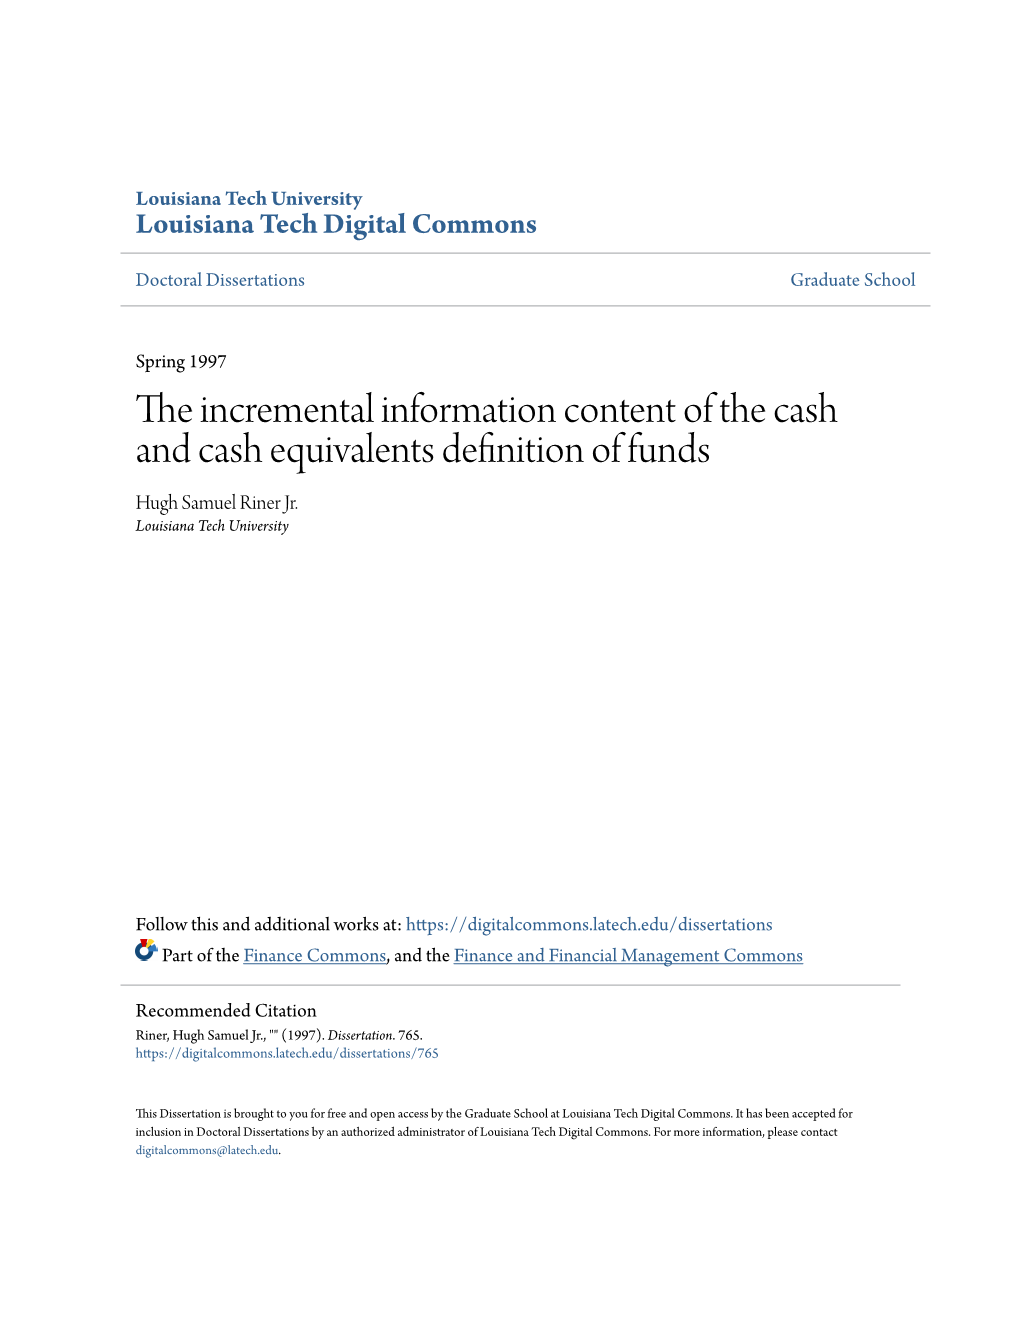 The Incremental Information Content of the Cash and Cash Equivalents Definition of Funds Hugh Samuel Riner Jr